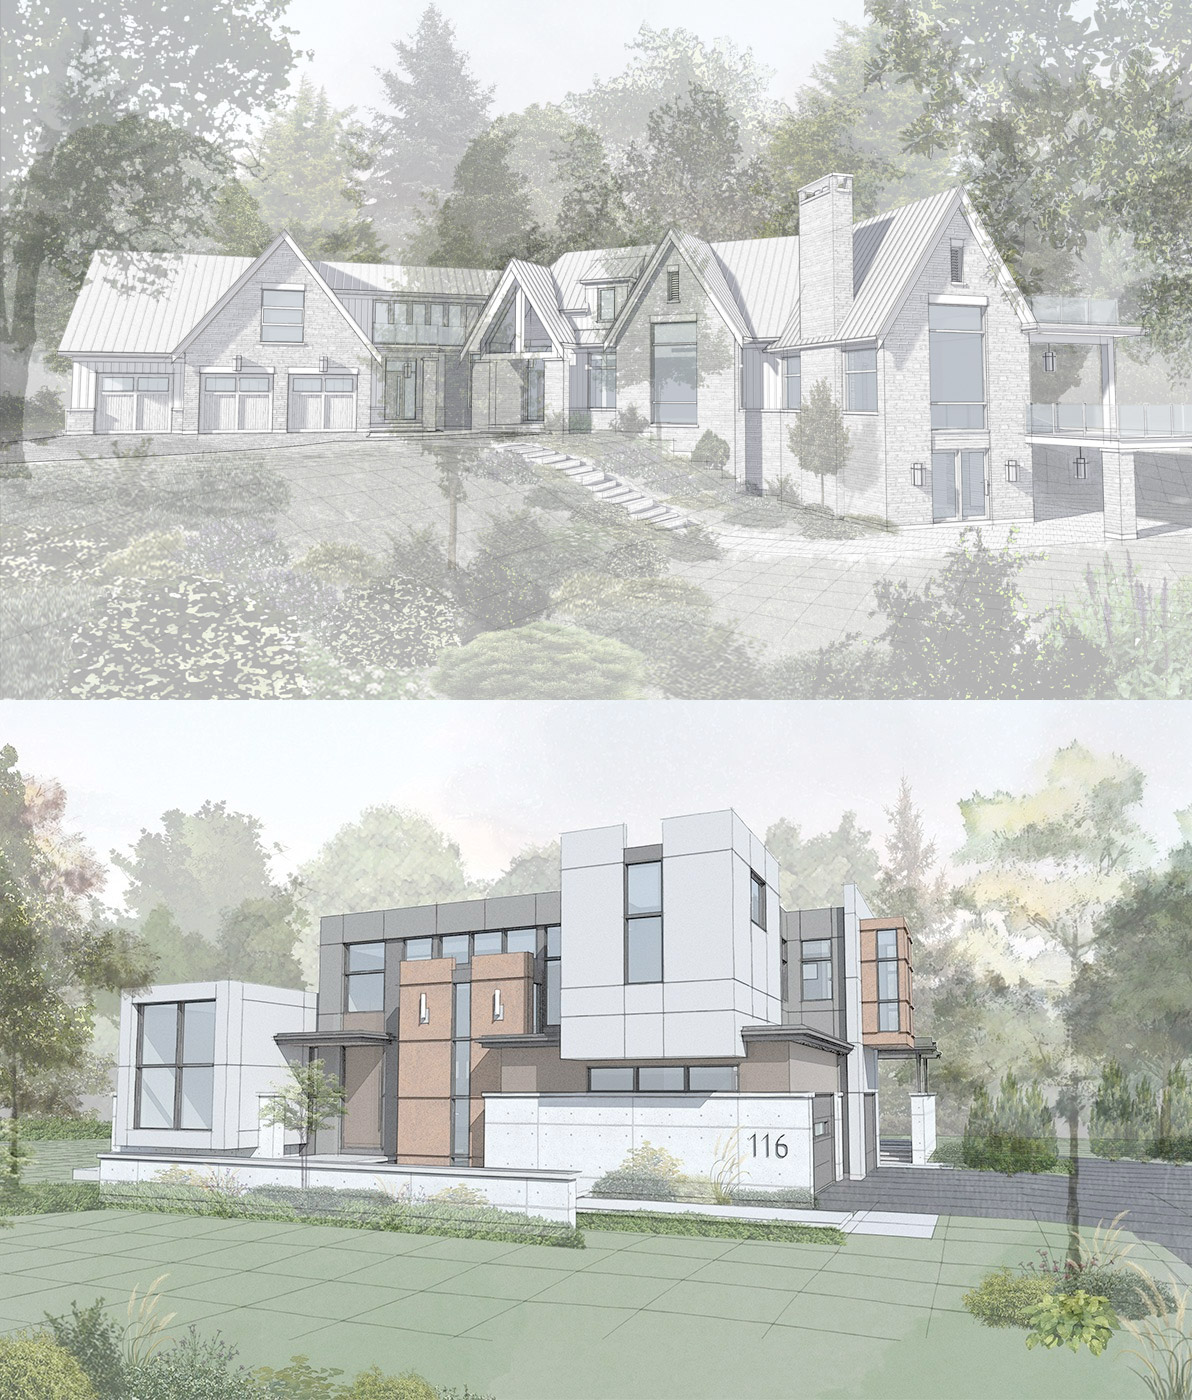 Architectural rendering of custom homes.